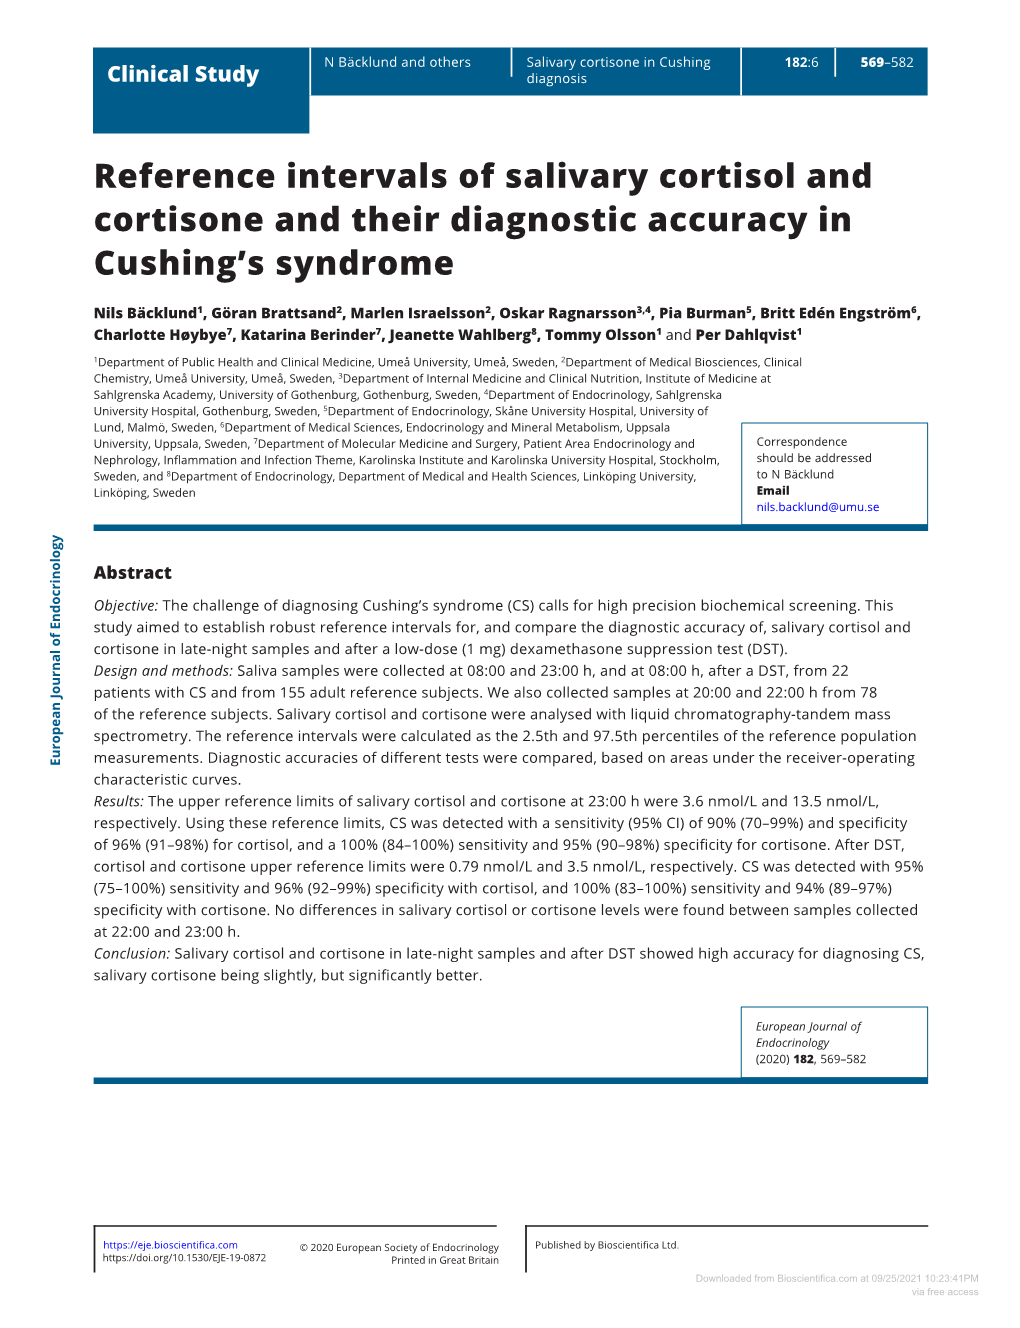 Reference Intervals of Salivary Cortisol and Cortisone and Their Diagnostic Accuracy in Cushing’S Syndrome